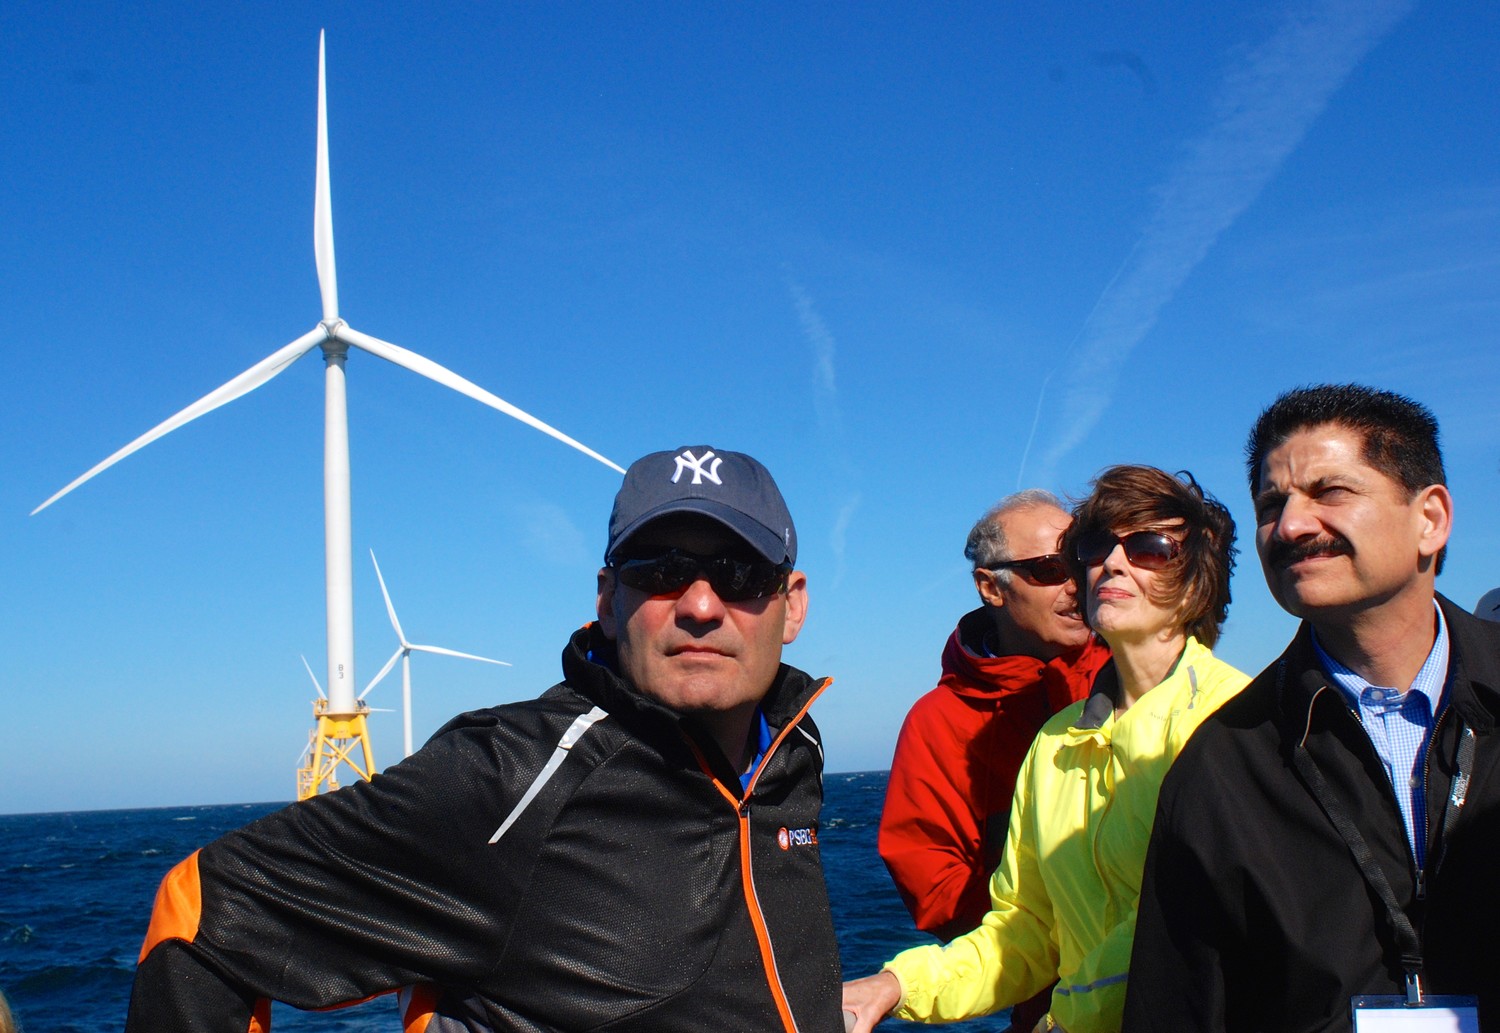 The Long Island Association, in conjunction with Stony Brook University's Advanced Energy Research Center, the Gershow Recycling Corporation and Deepwater Wind, hosted a tour last Wednesday of the wind farm recently constructed three miles off the Block Island coastline. At center, in yellow, was LIA Board of Directors member Katherine Heaviside.